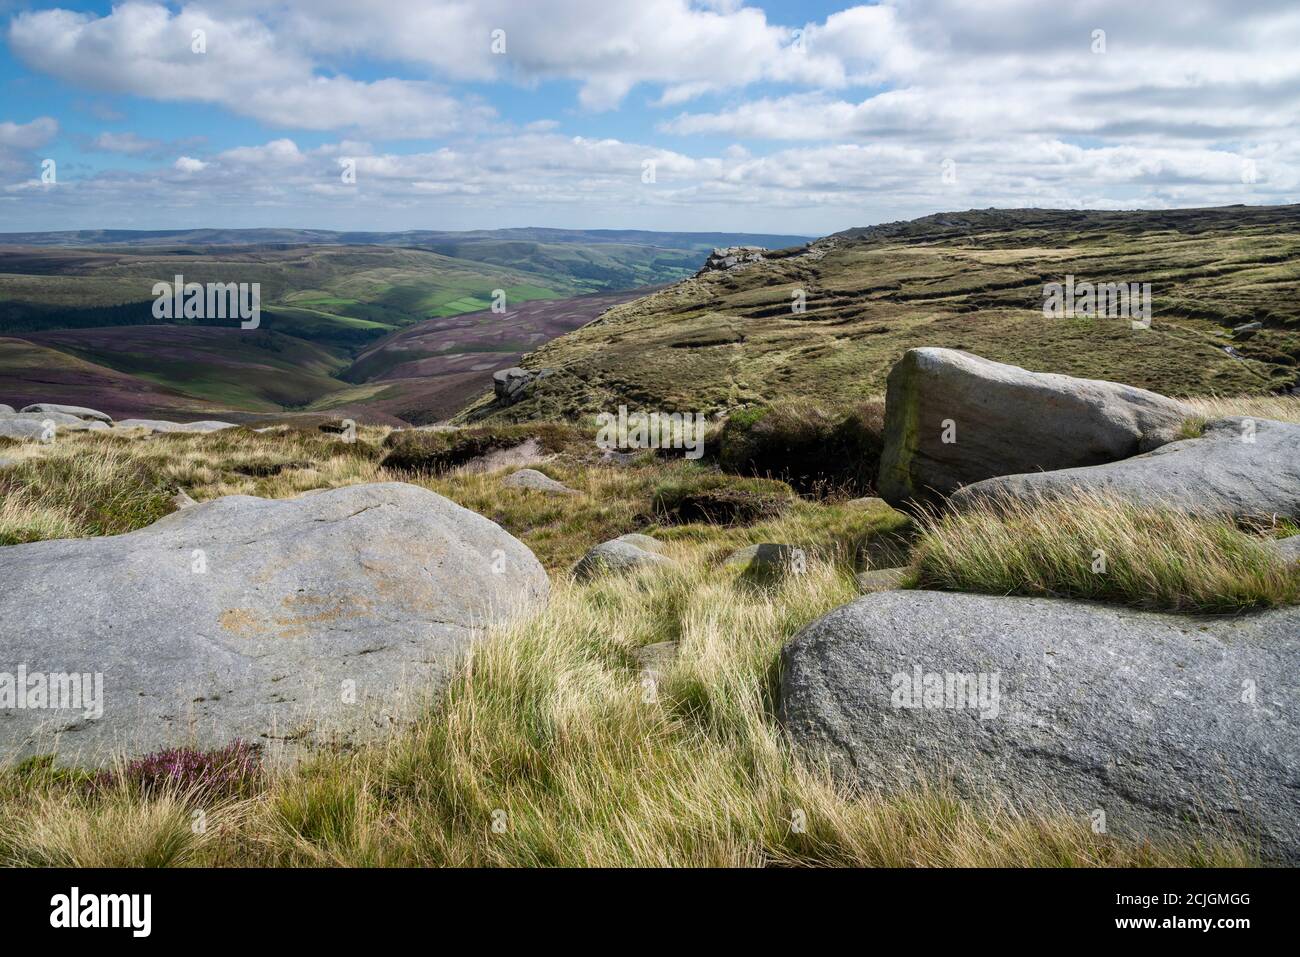 Gritstone rocks at Fairbrook Naze on the northern edge of Kinder Scout, Peak District, Derbyshire, England. Stock Photo